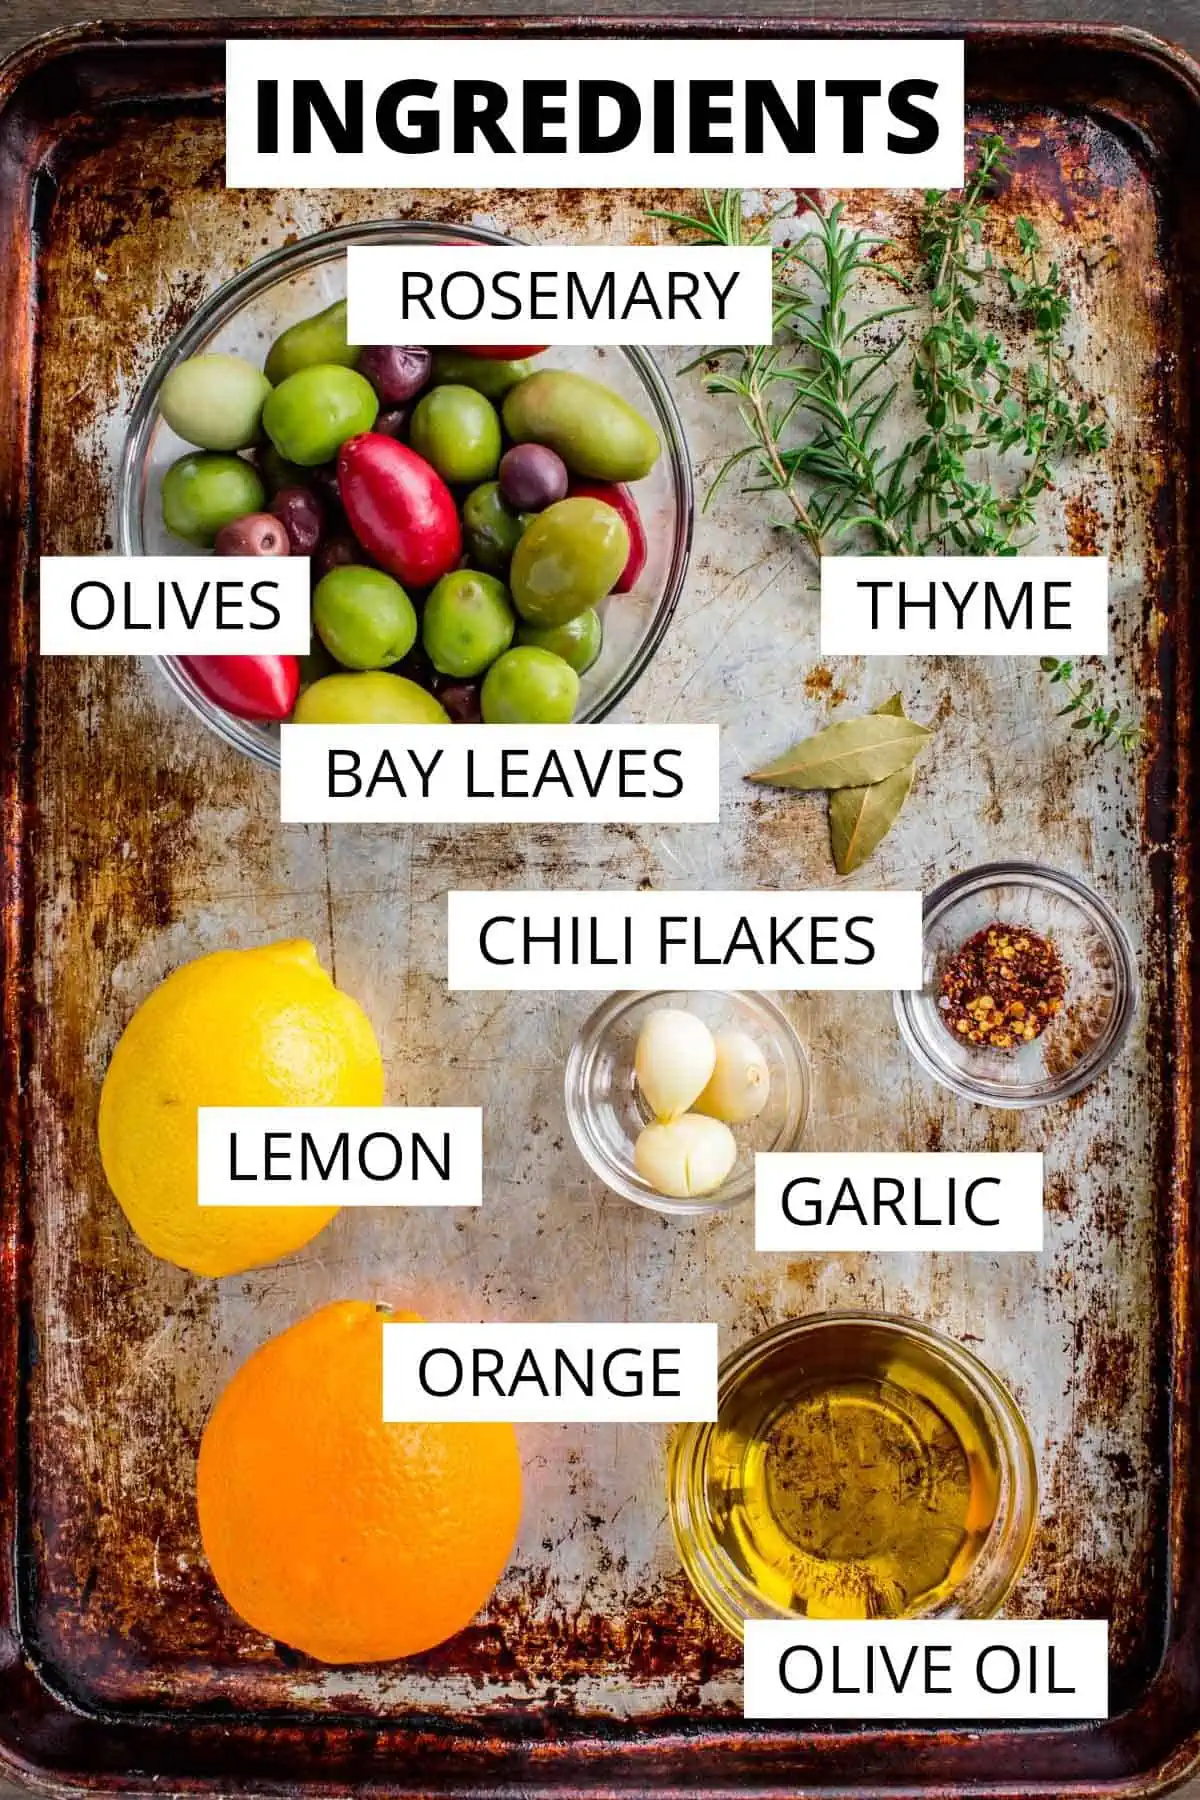 Ingredients for citrus marinated olives.